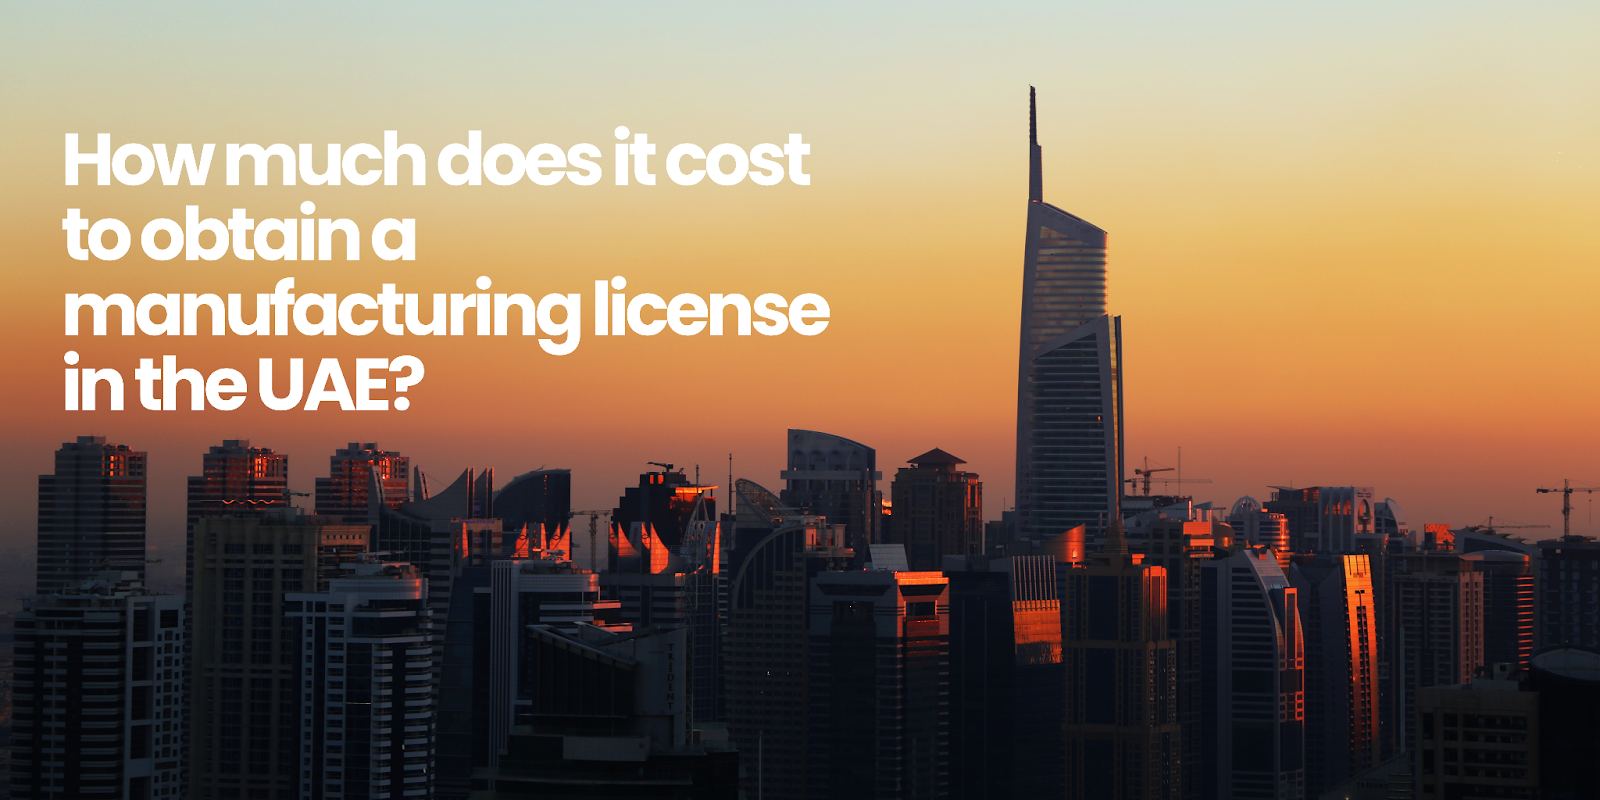 How much does it cost to obtain a manufacturing license in the UAE?